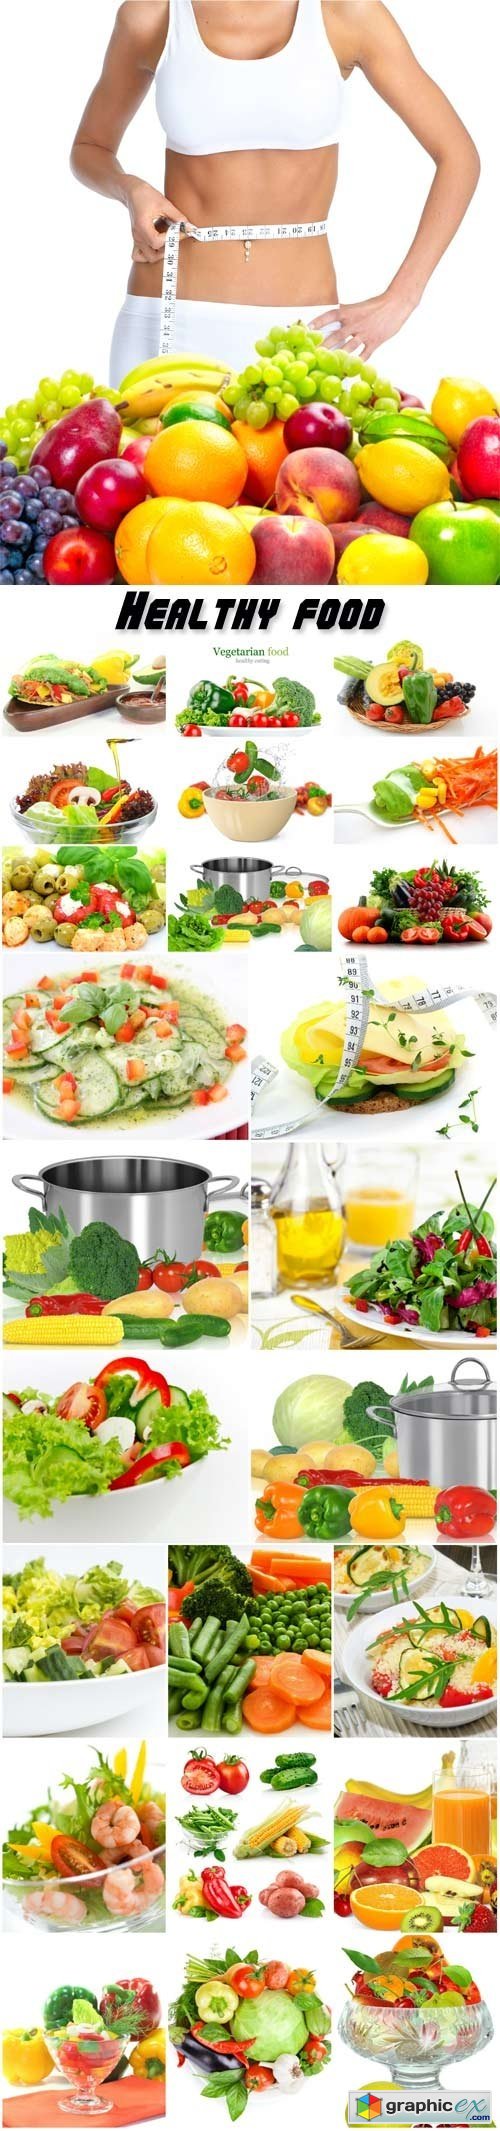 Healthy food, fruits and vegetables, vegetarian dishes